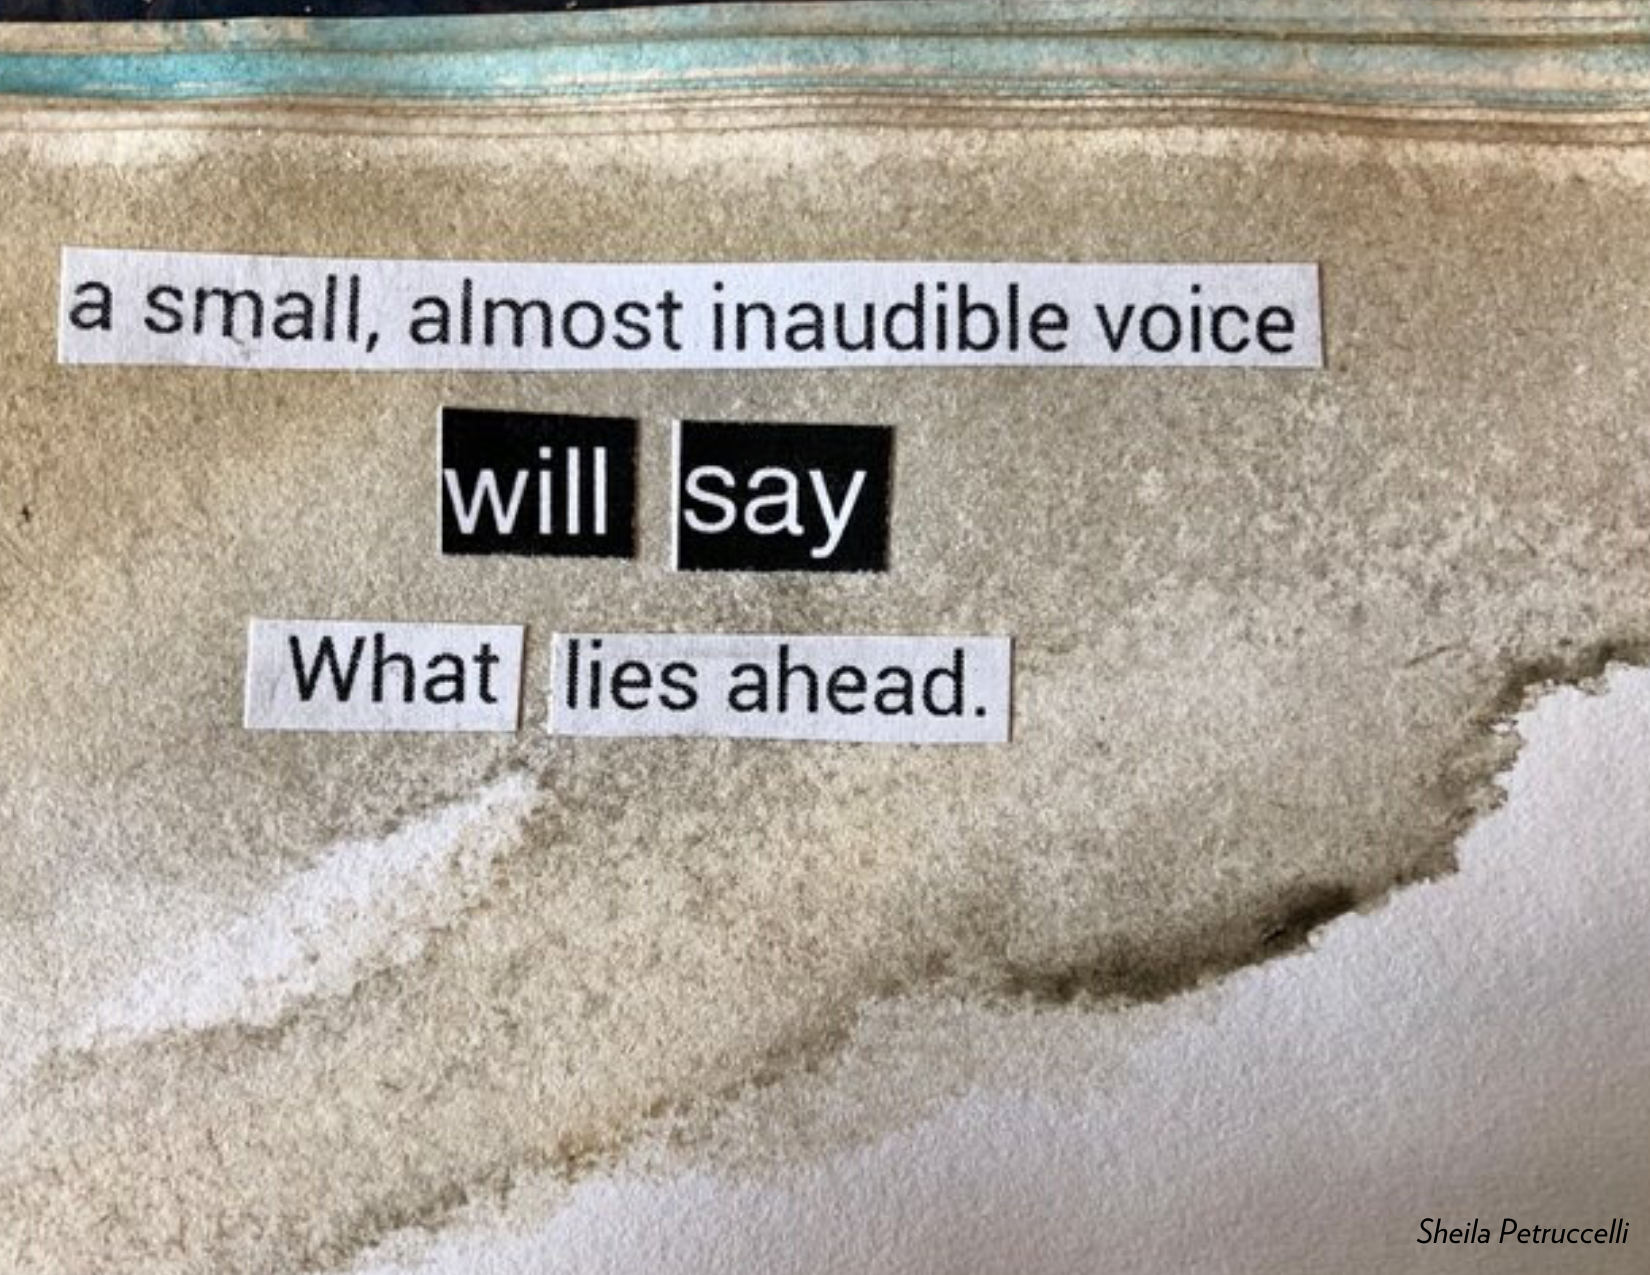 A small, almost inaudible voice will say what lies ahead. By Sheila Petruccelli